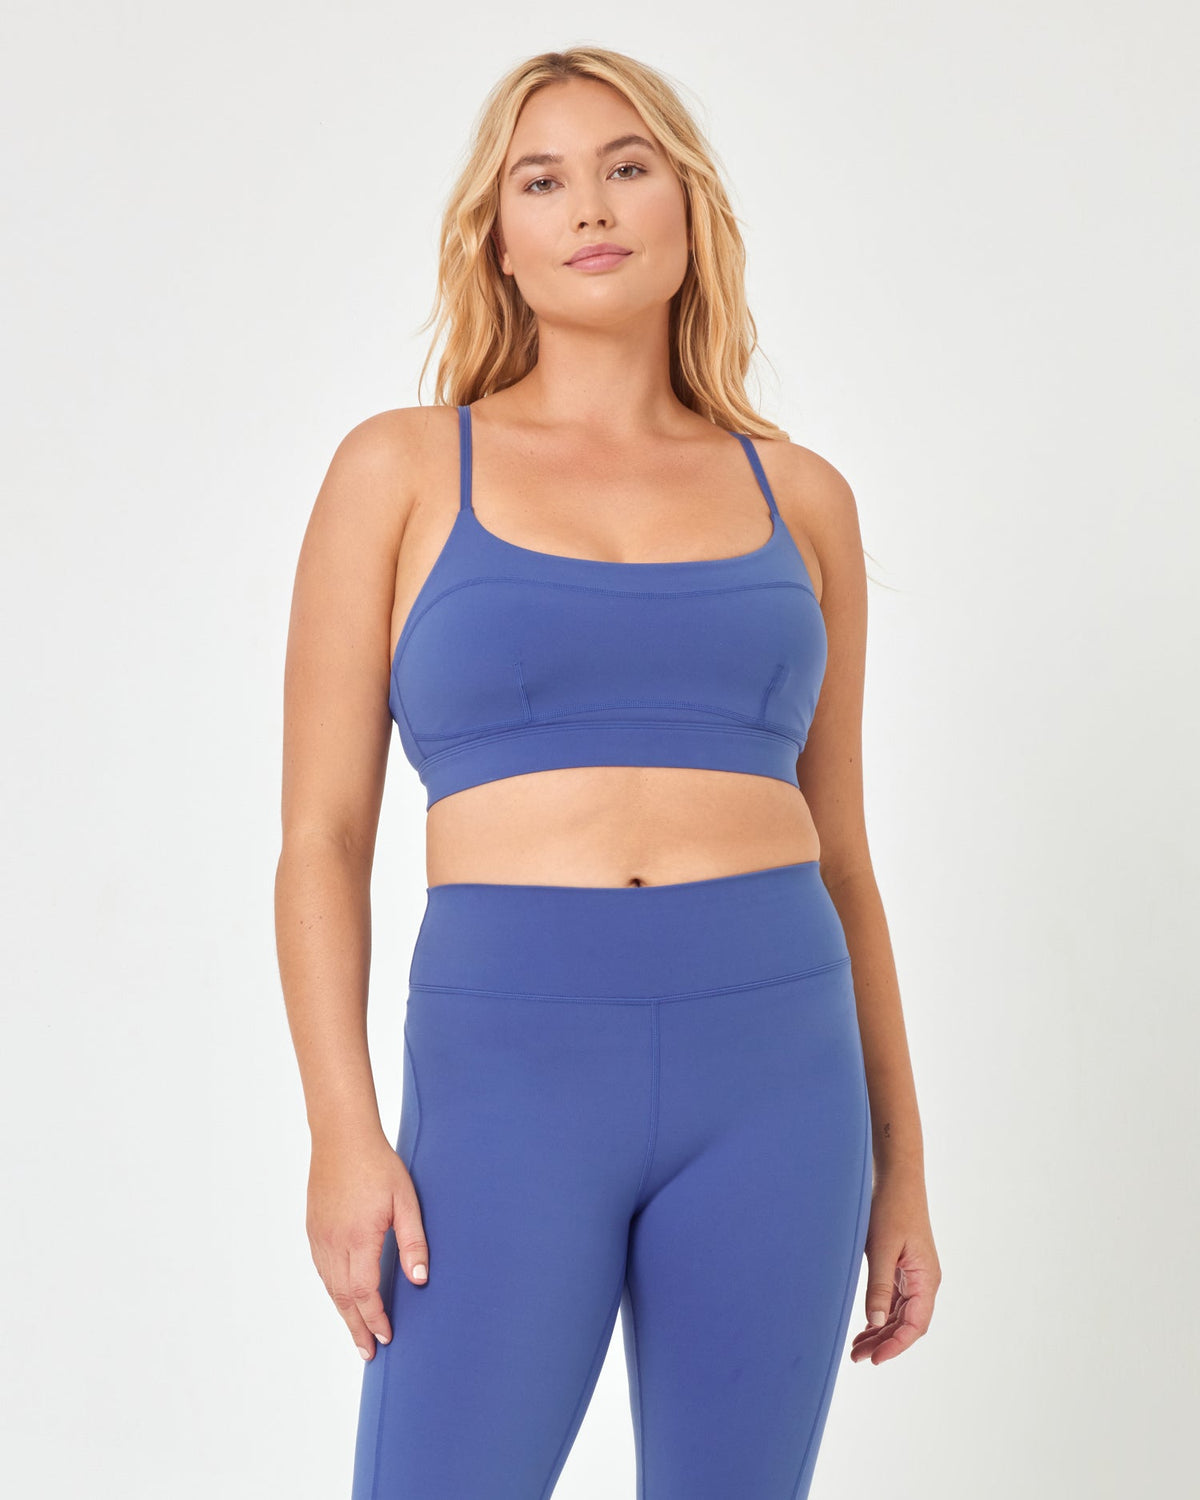 Product  Time Out Bra - True Blue